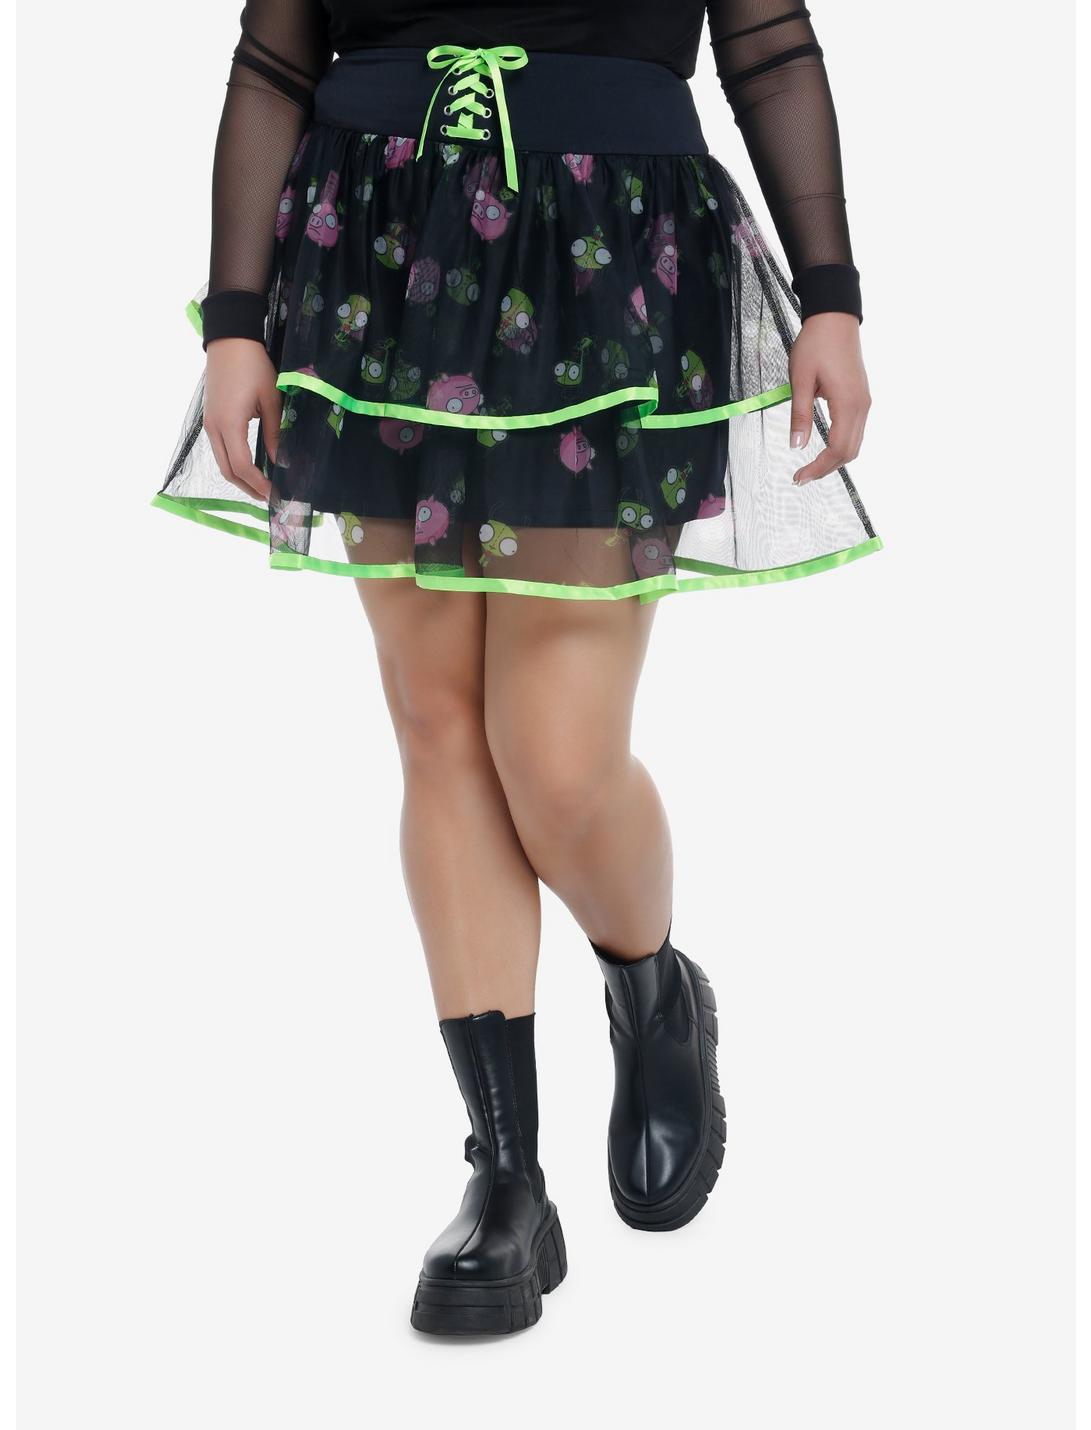 Invader Zim Tiered Tulle Skirt Plus Size, MULTI, hi-res